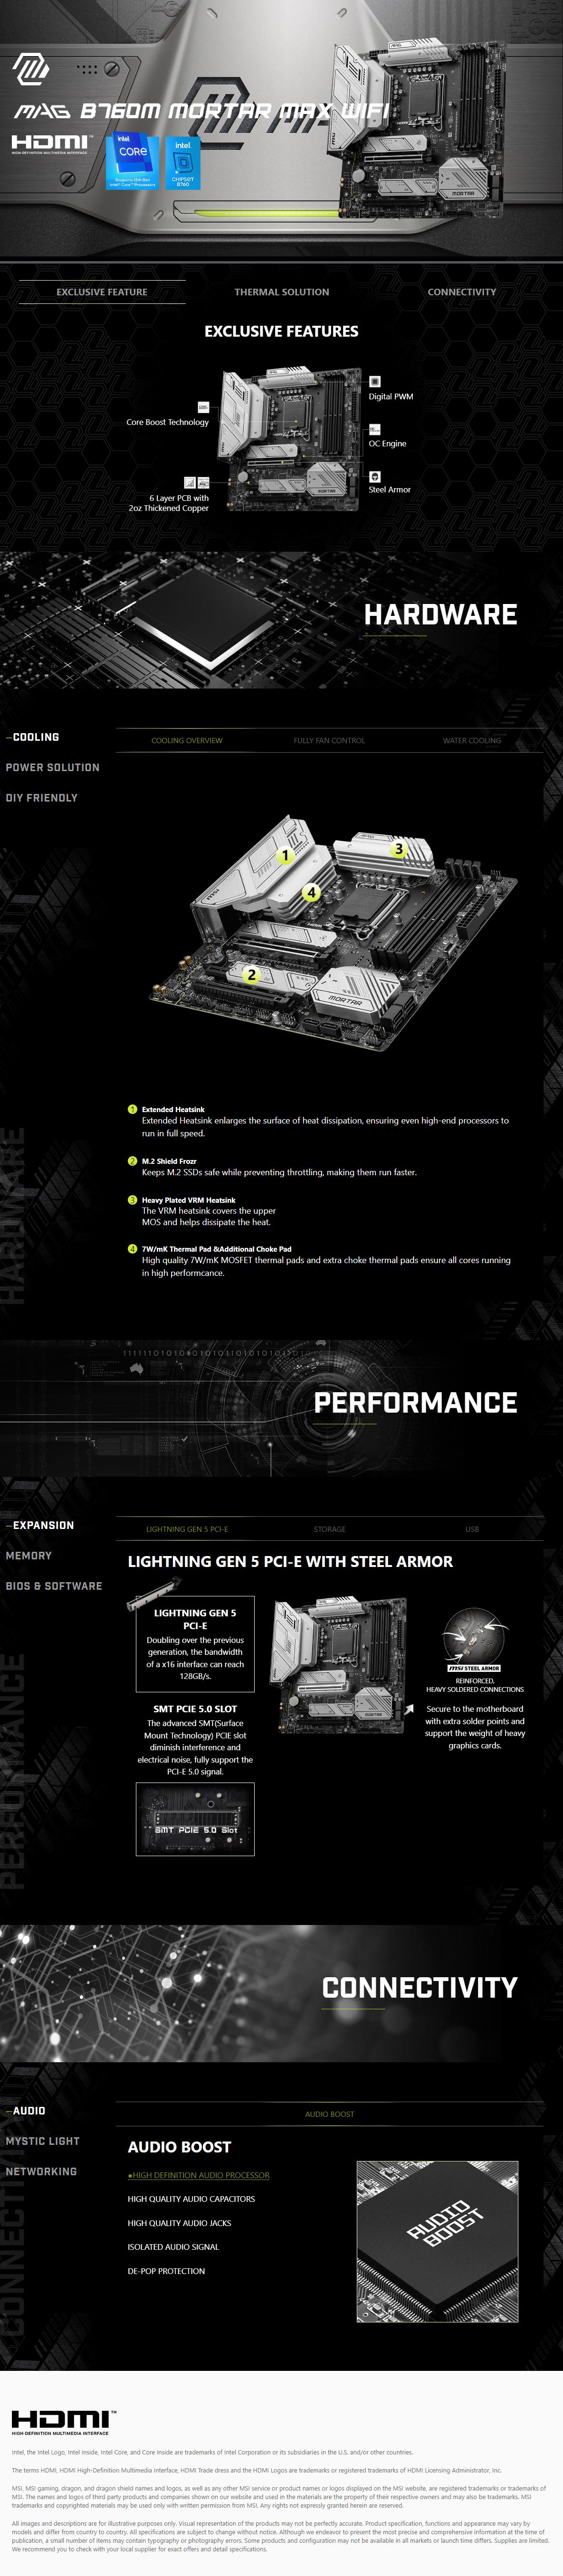 A large marketing image providing additional information about the product MSI MAG B760M Mortar Max WiFi LGA1700 mATX Desktop Motherboard - Additional alt info not provided